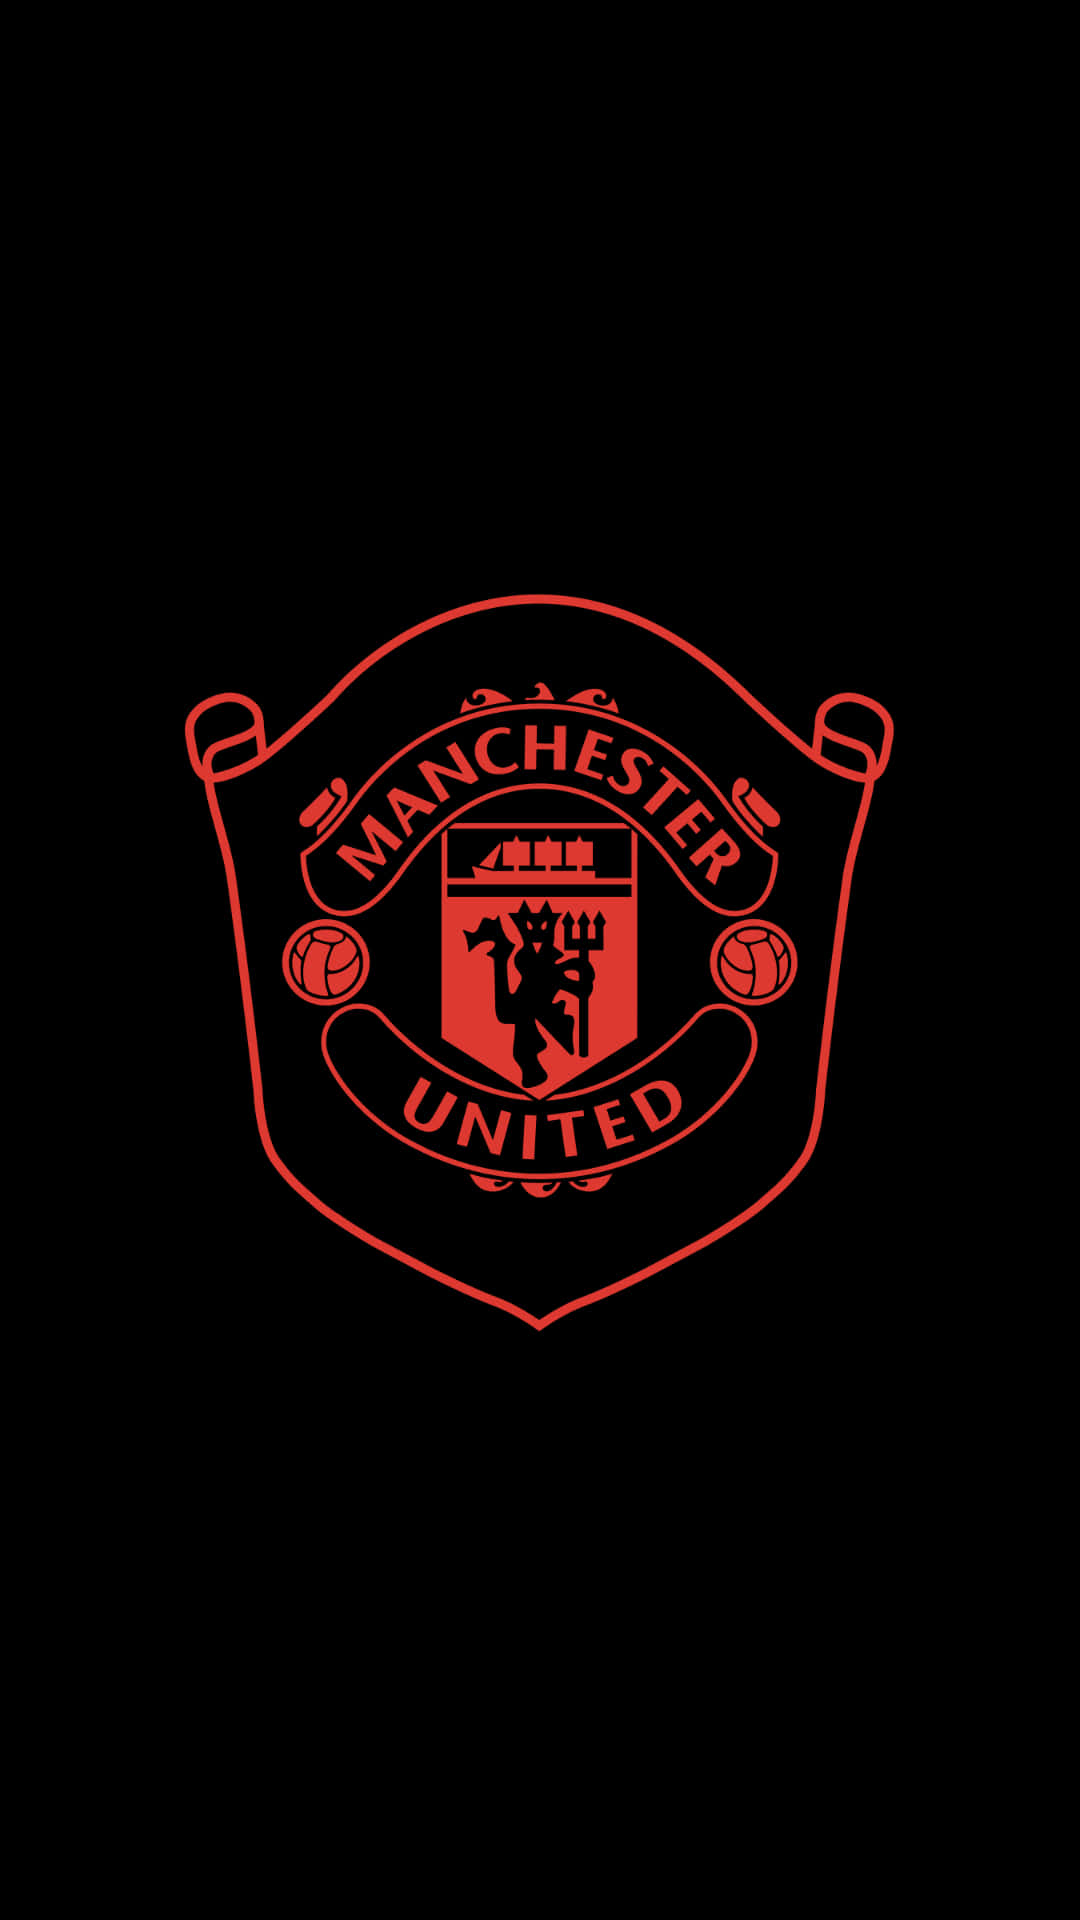 Celebrate Manchester United with your custom Iphone Wallpaper